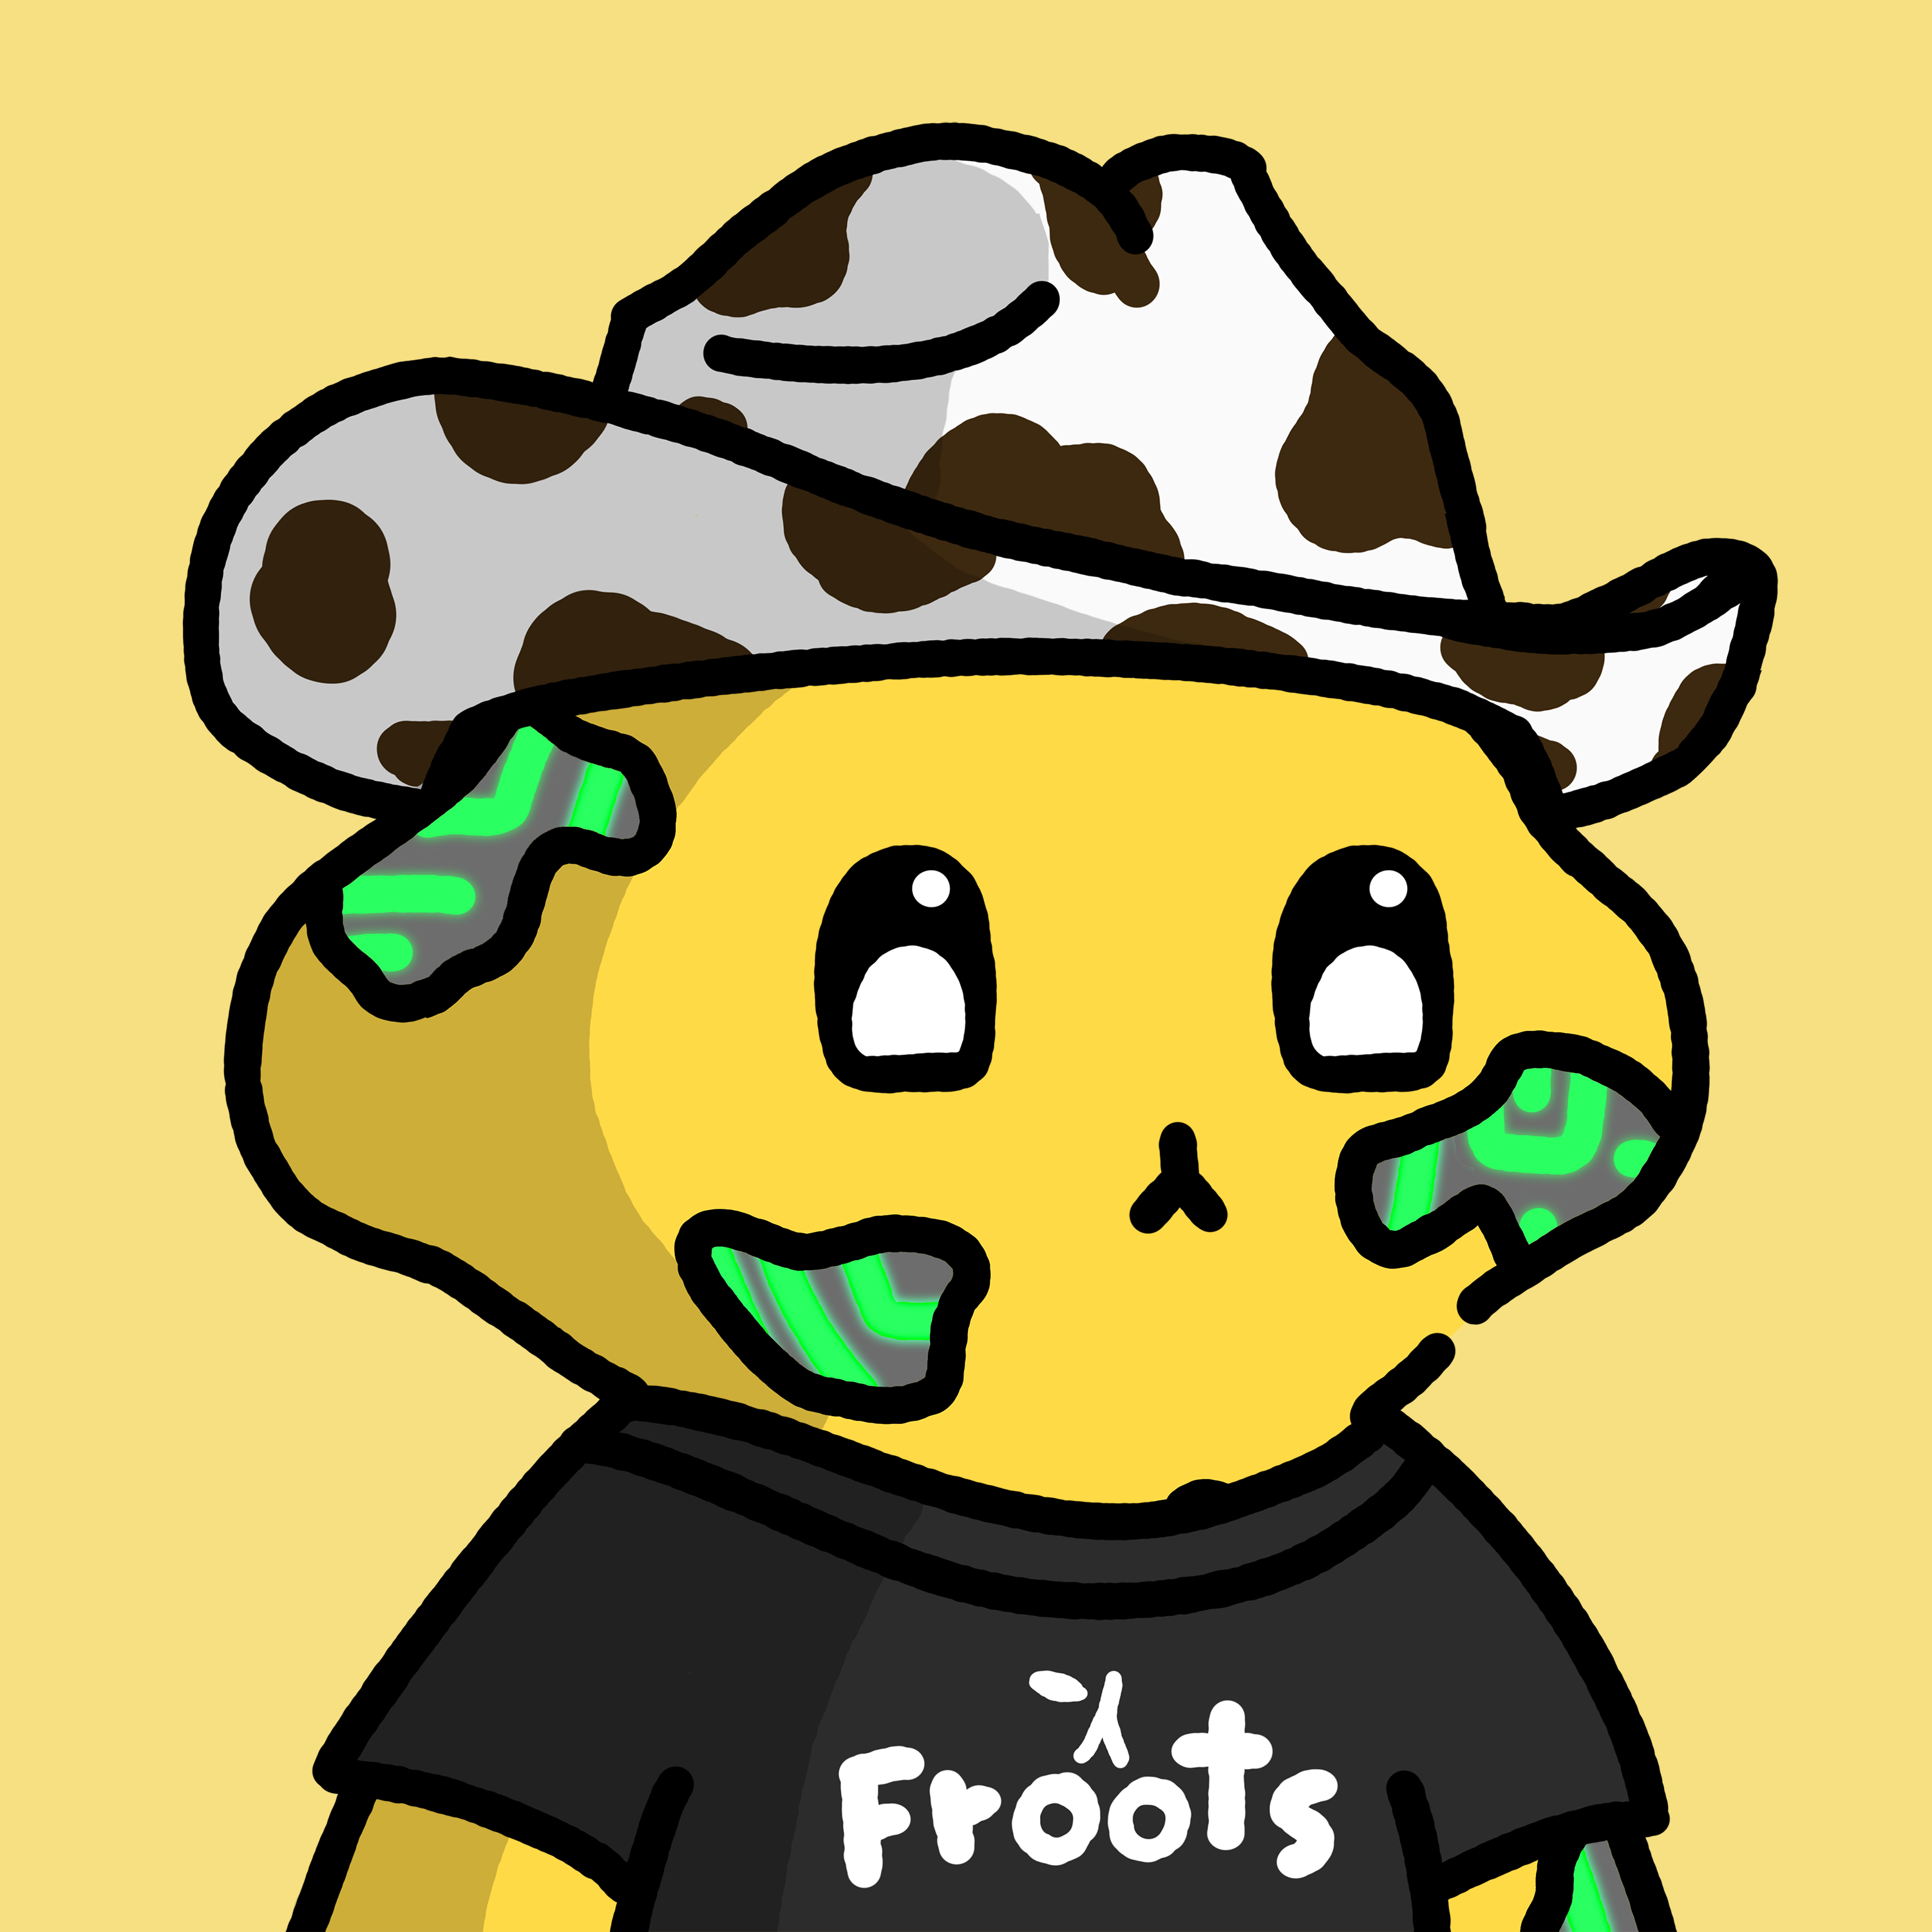 Froots #7280